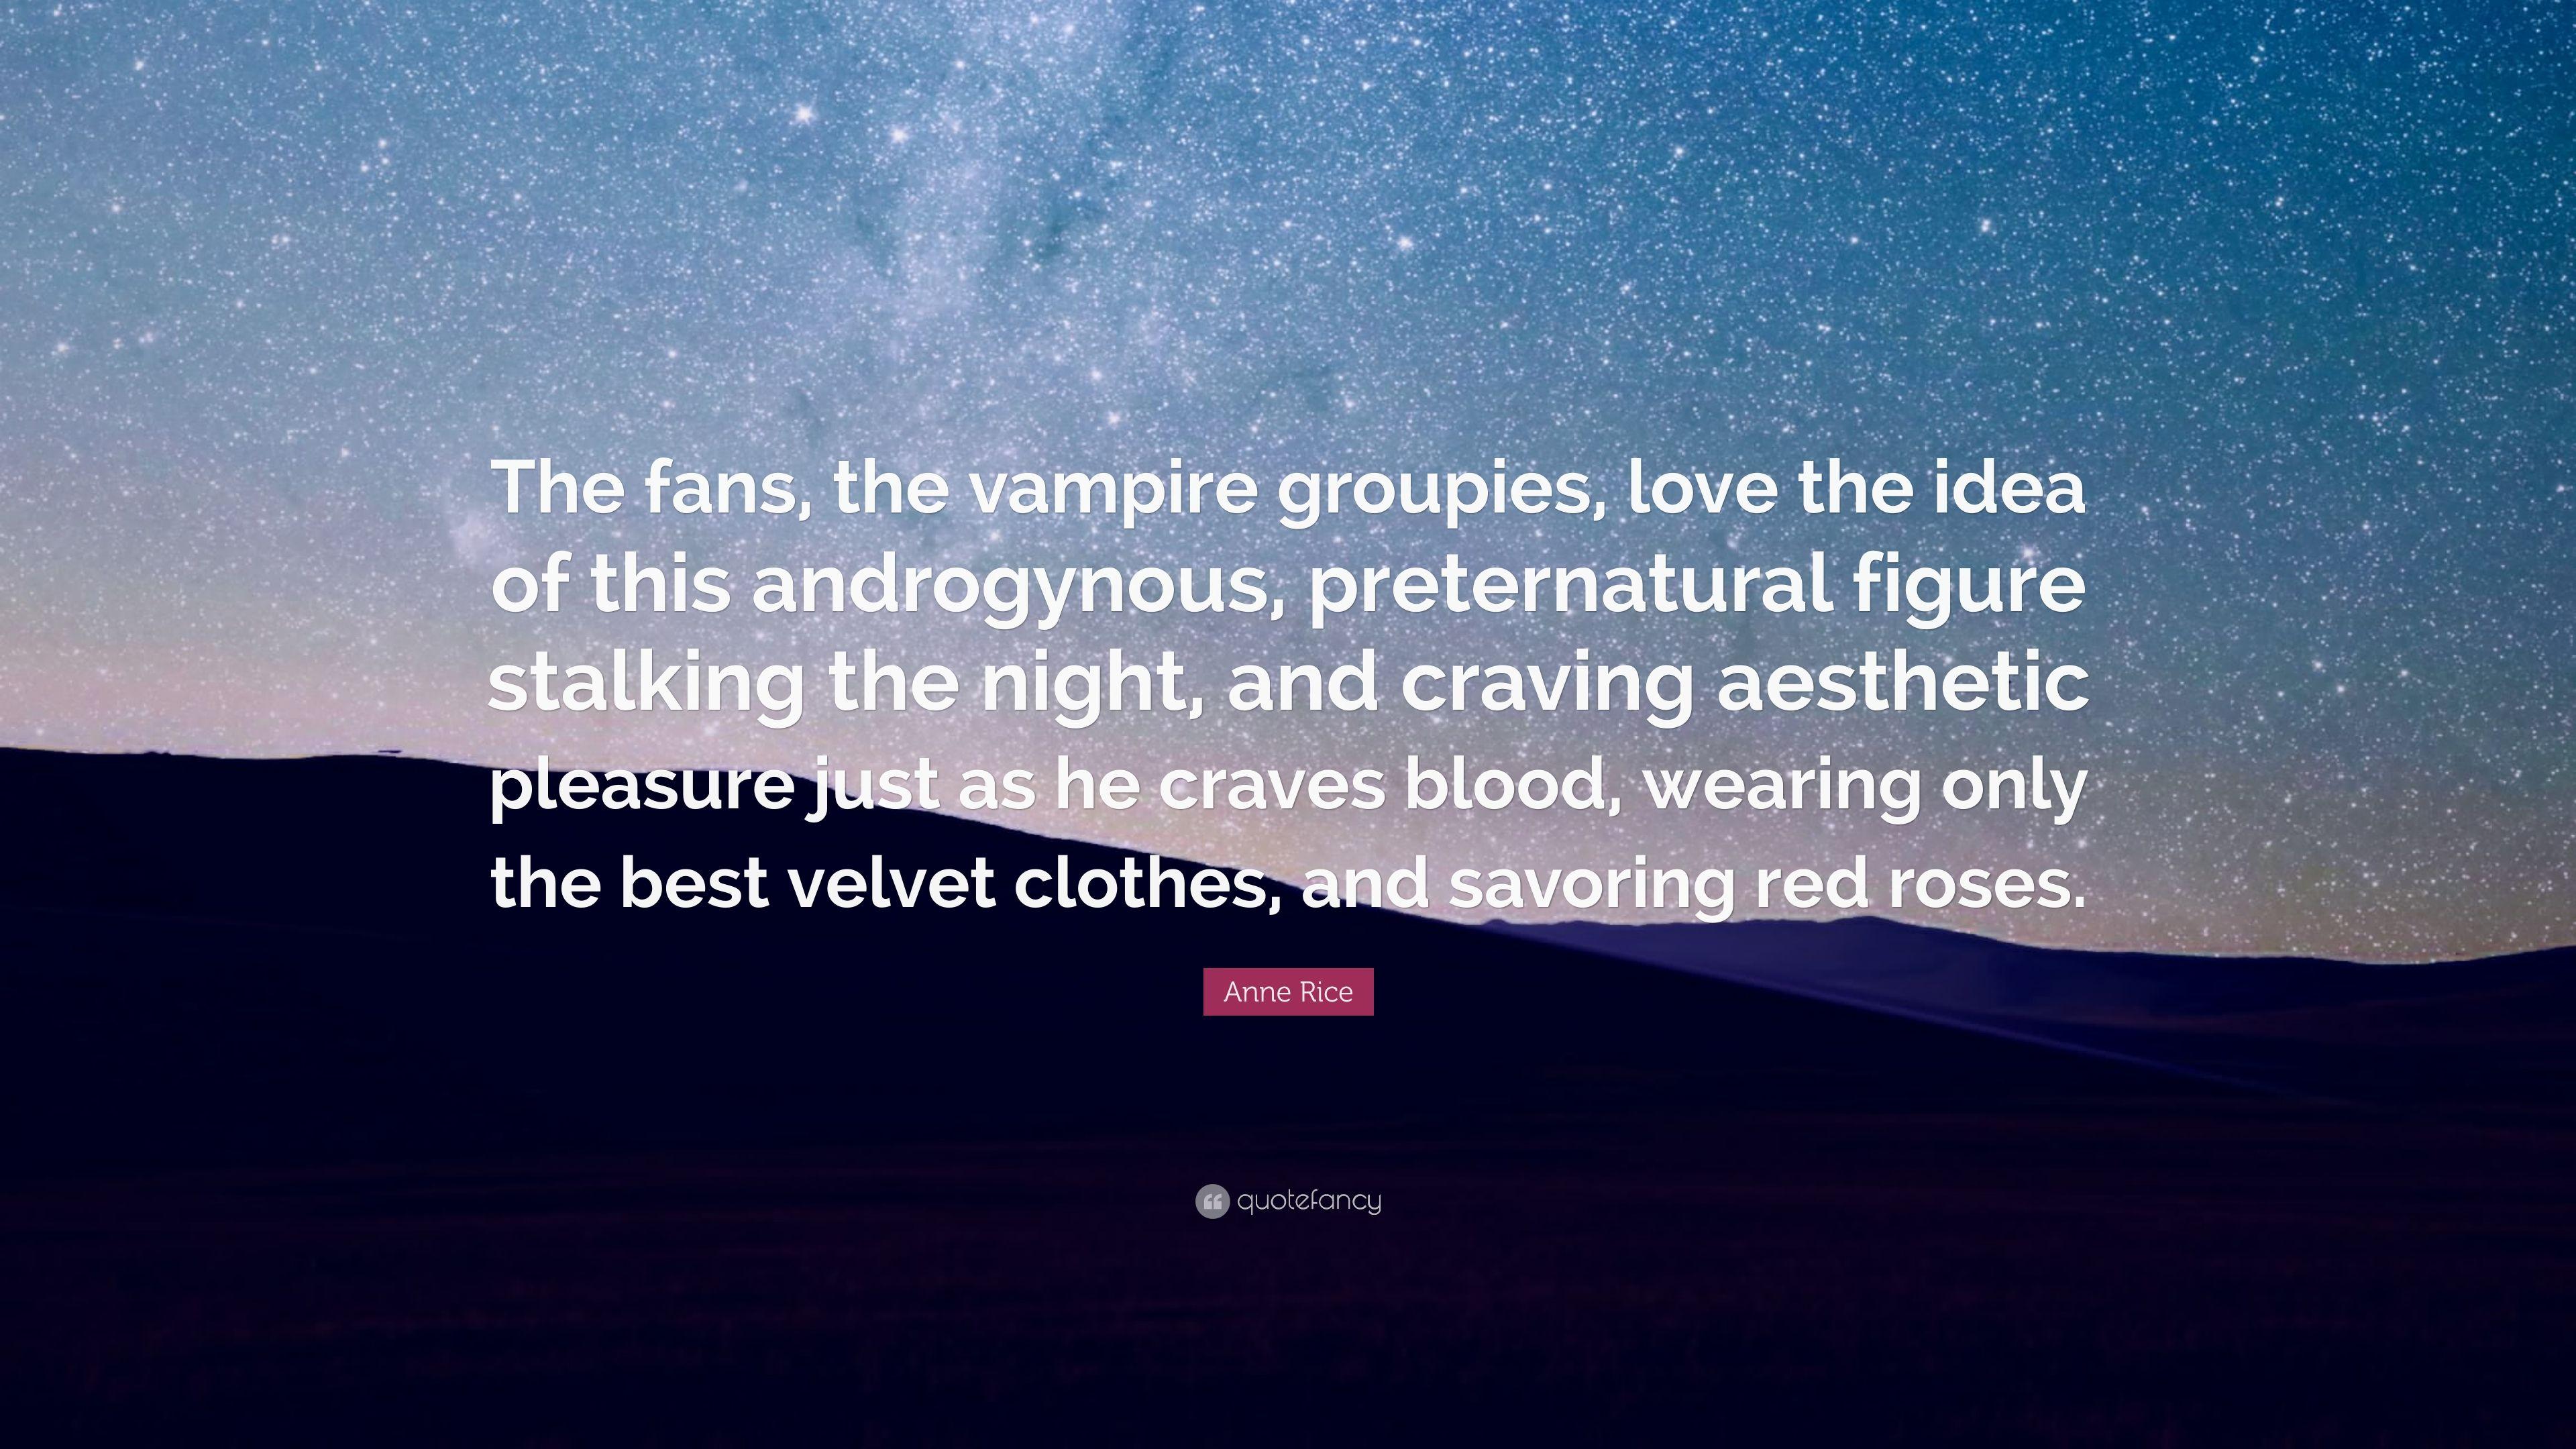 Anne Rice Quote: “The fans, the vampire groupies, love